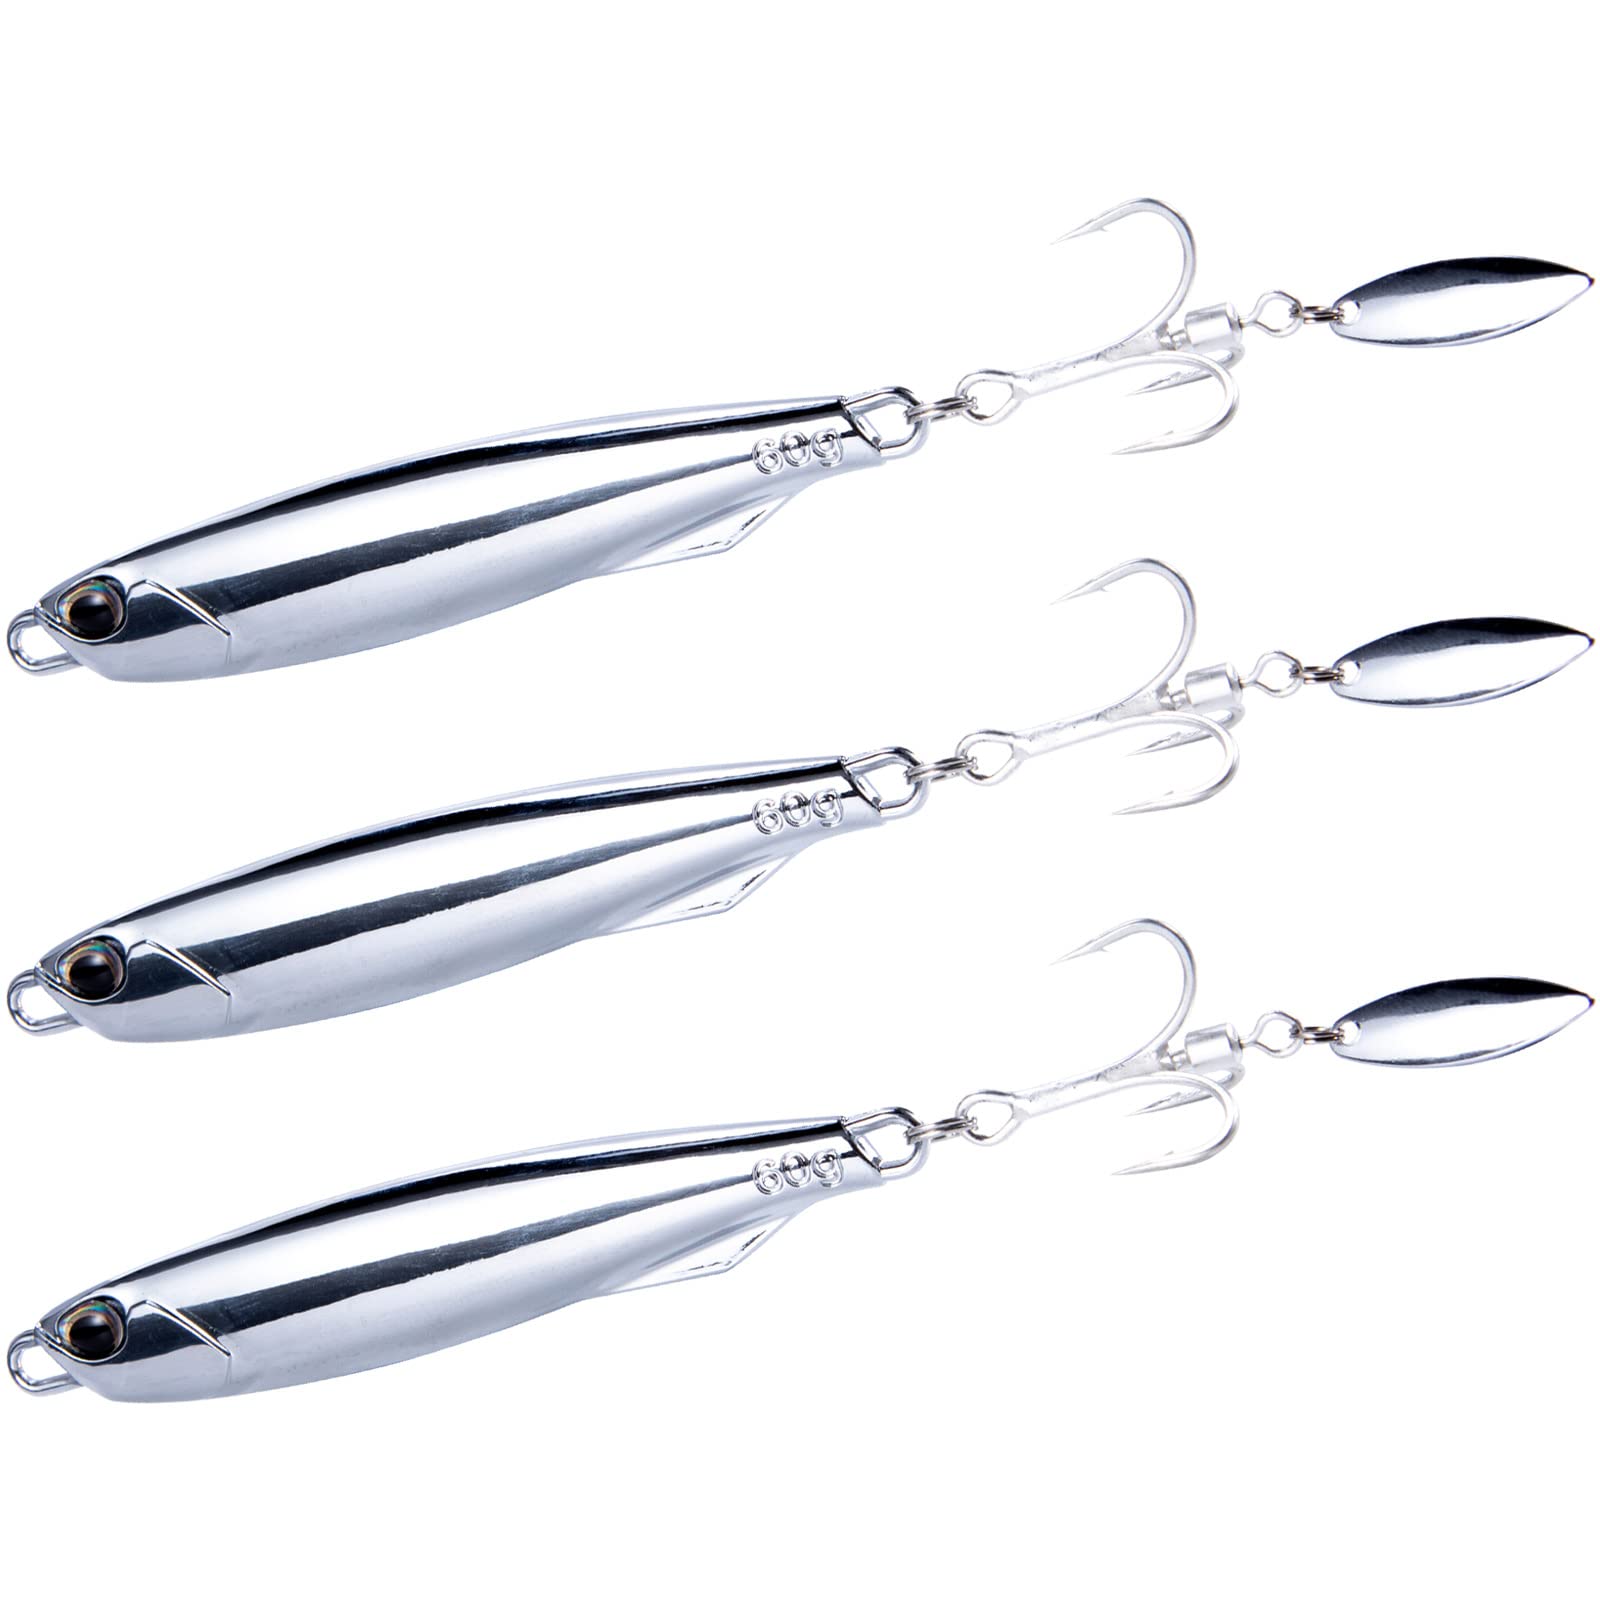 Dr.Fish 3 Pack Jigging Spoons Metal Casting Jigs Bladed Treble